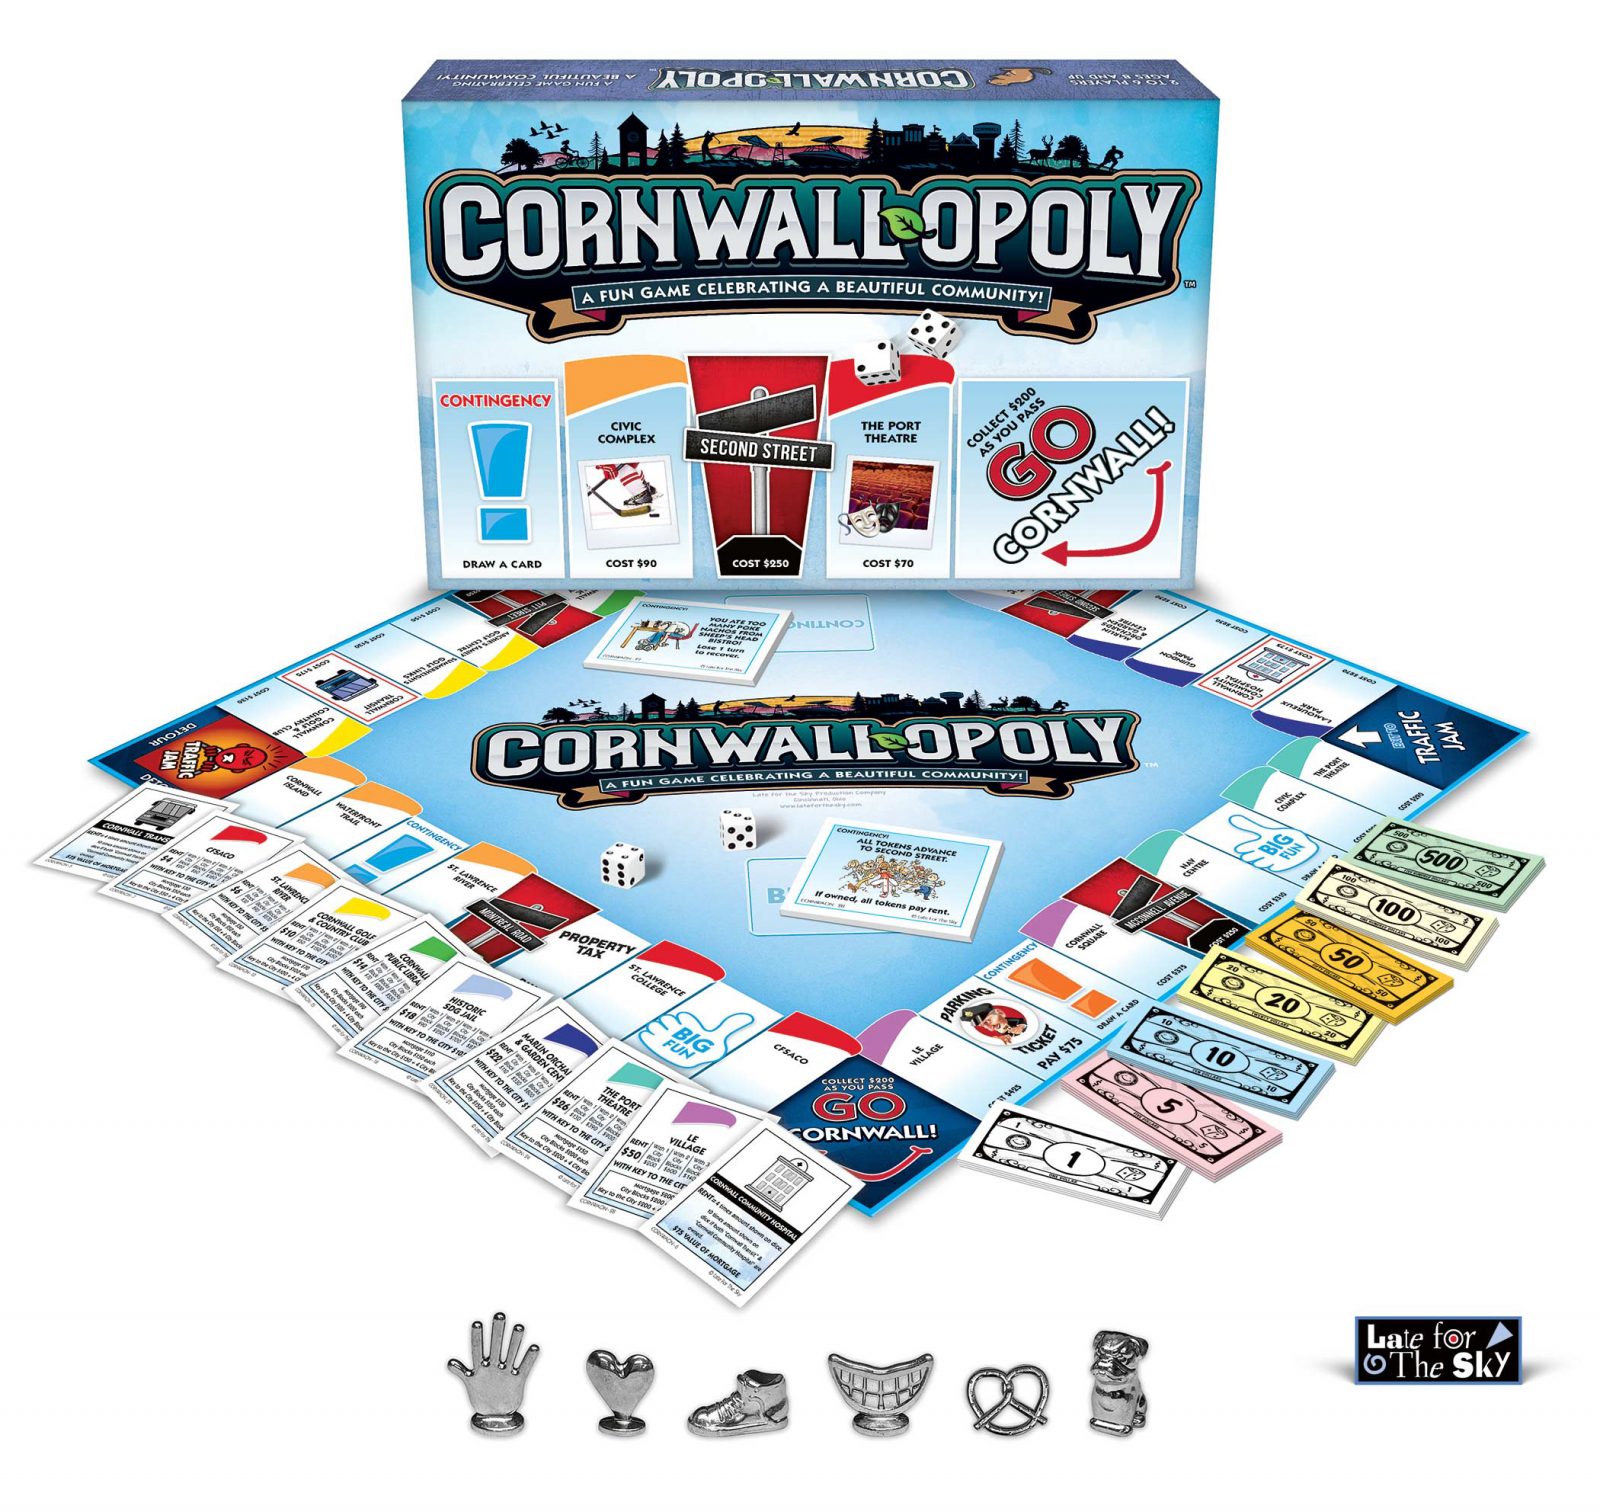 Celebrate your community with the brand-new Cornwall-Opoly board game!